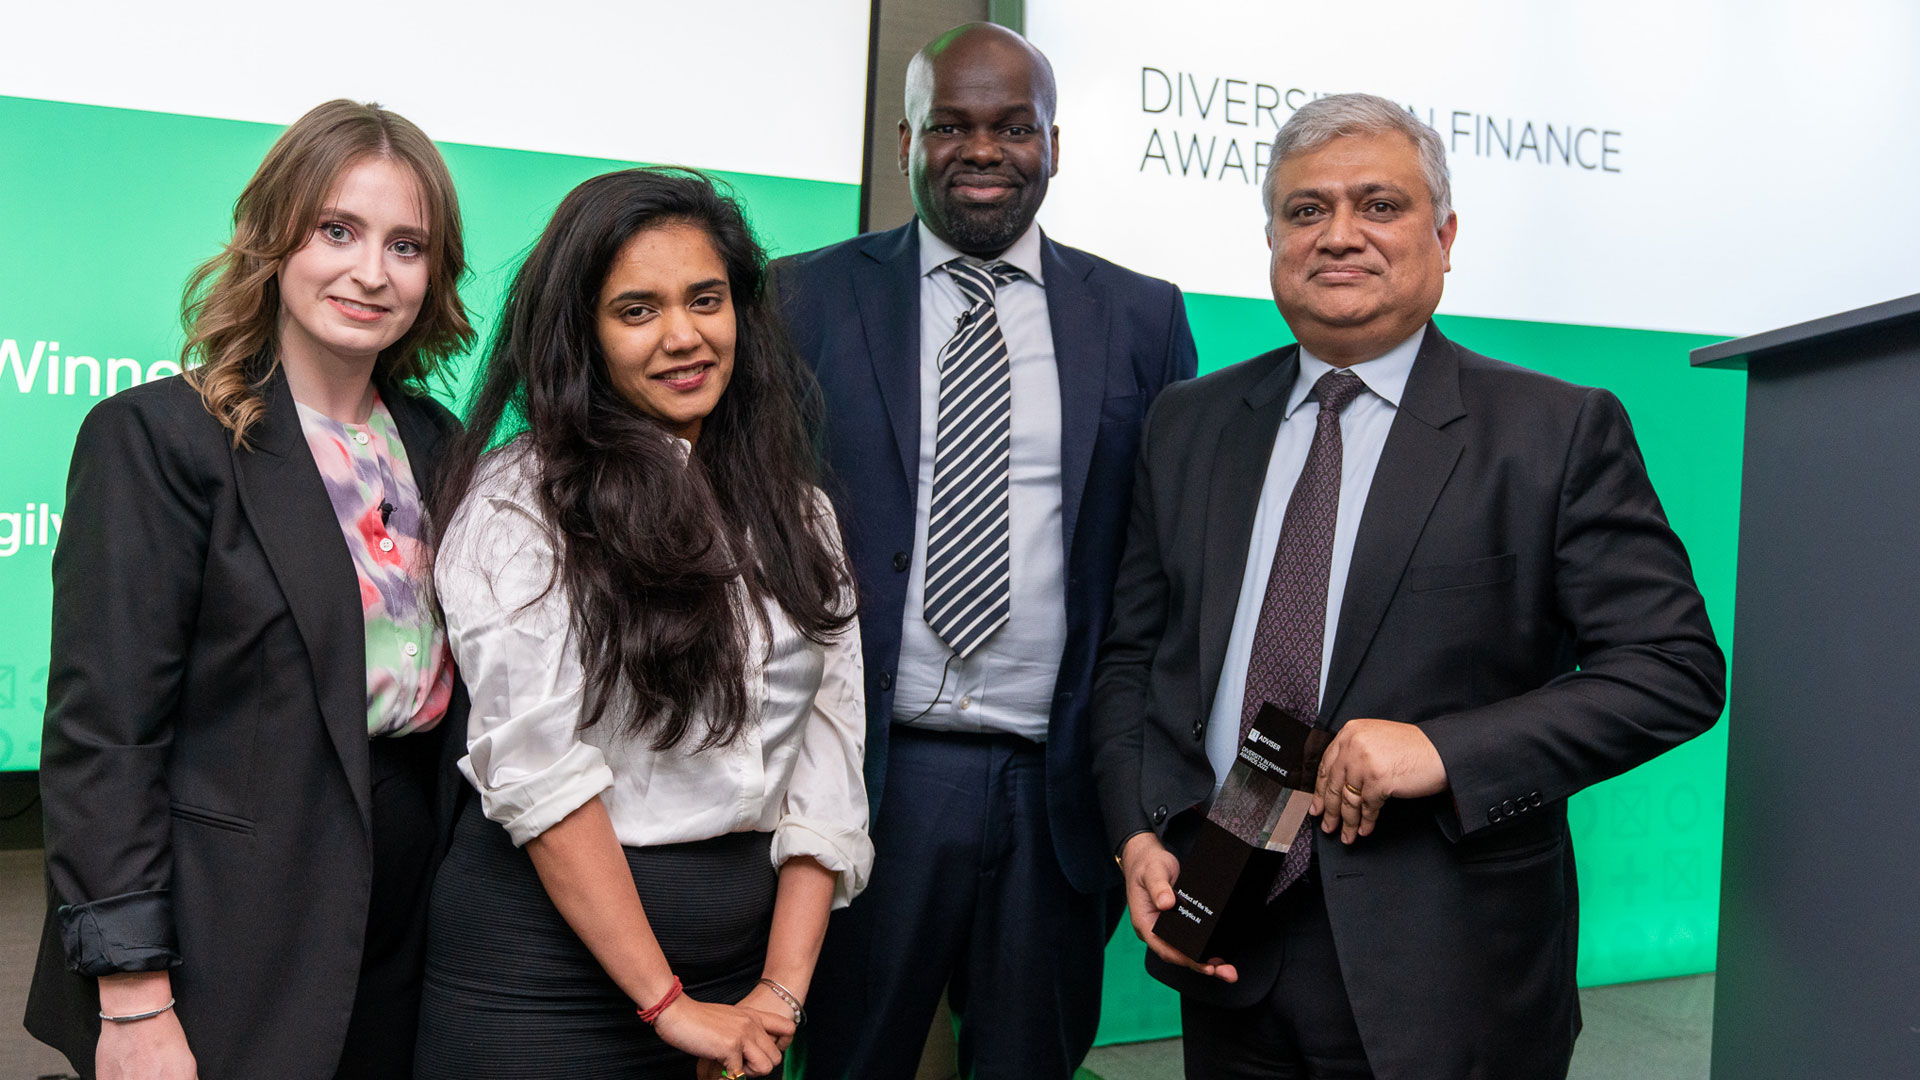 Digilytics AI awarded as ‘Product of the Year’ by FT Adviser Diversity in Finance Awards 2022